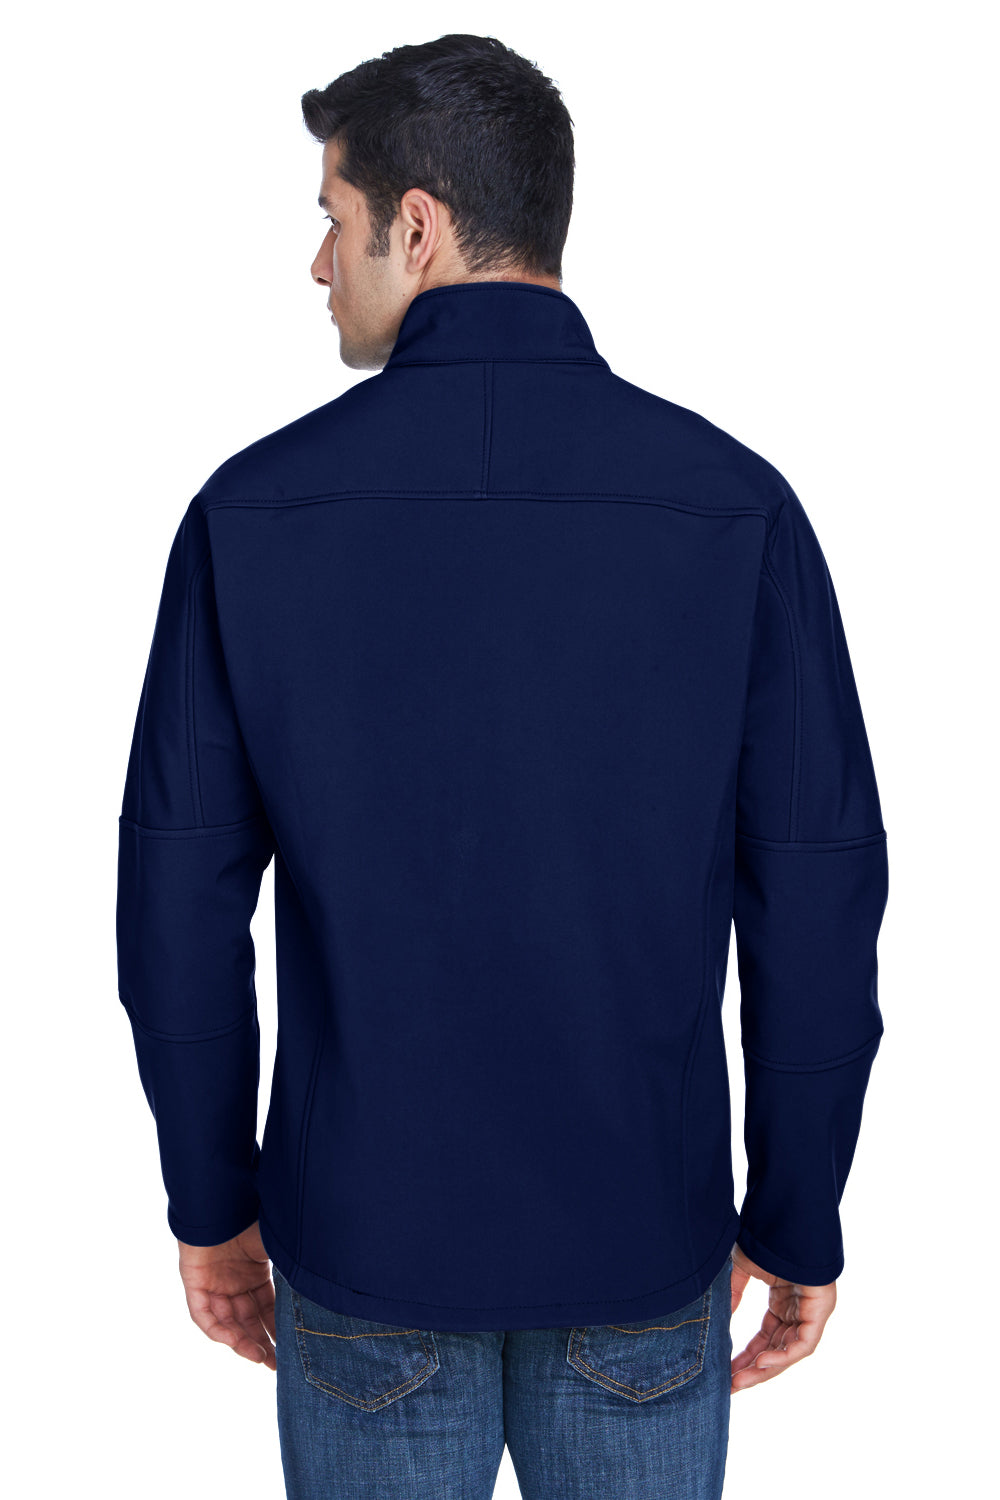 North End 88138 Mens Technical Water Resistant Full Zip Jacket Navy Blue Back